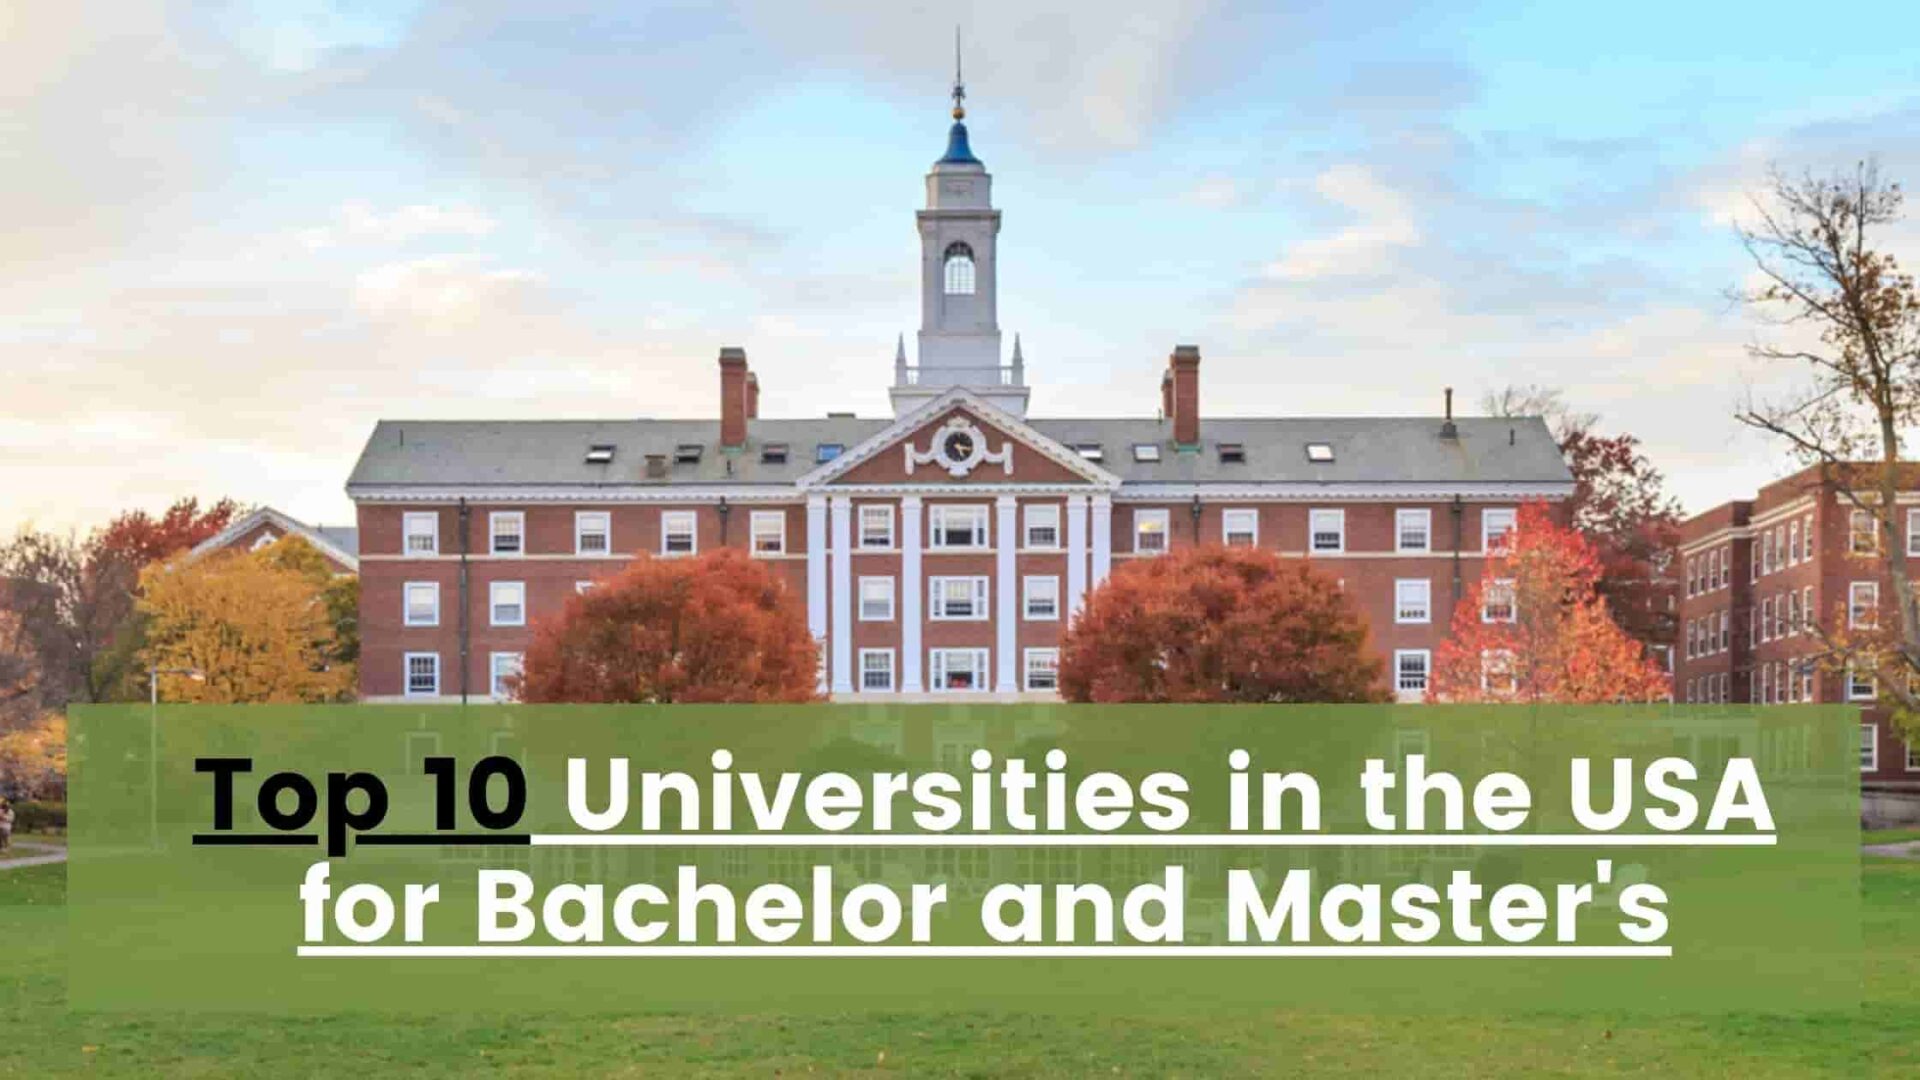 Top 10 Universities in the USA for Bachelor and Masters